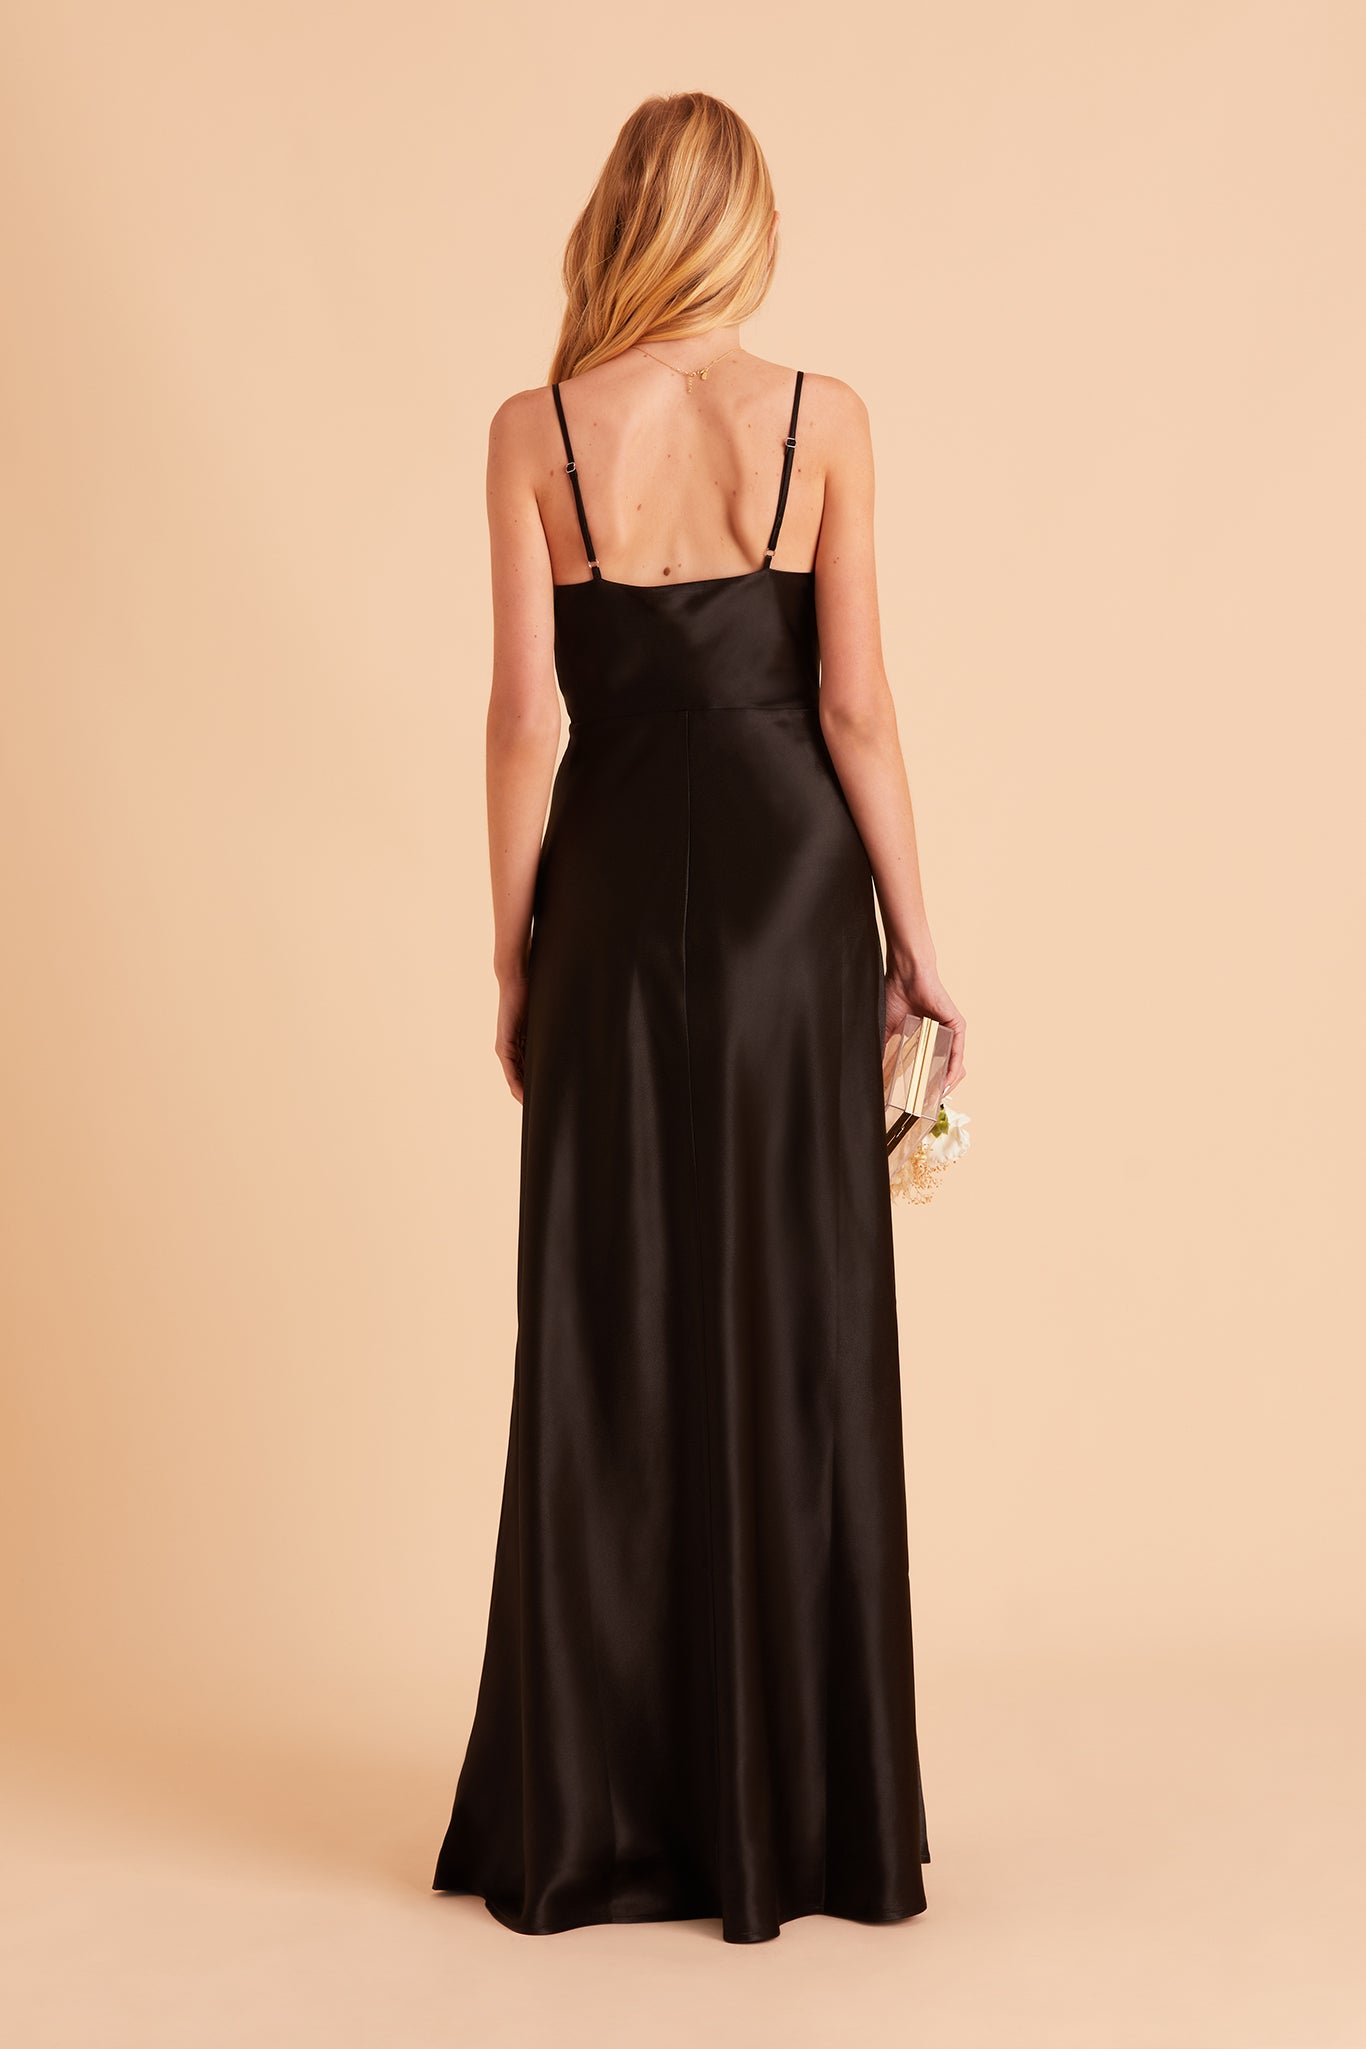 Lisa long bridesmaid dress with slit in black satin by Birdy Grey, back view